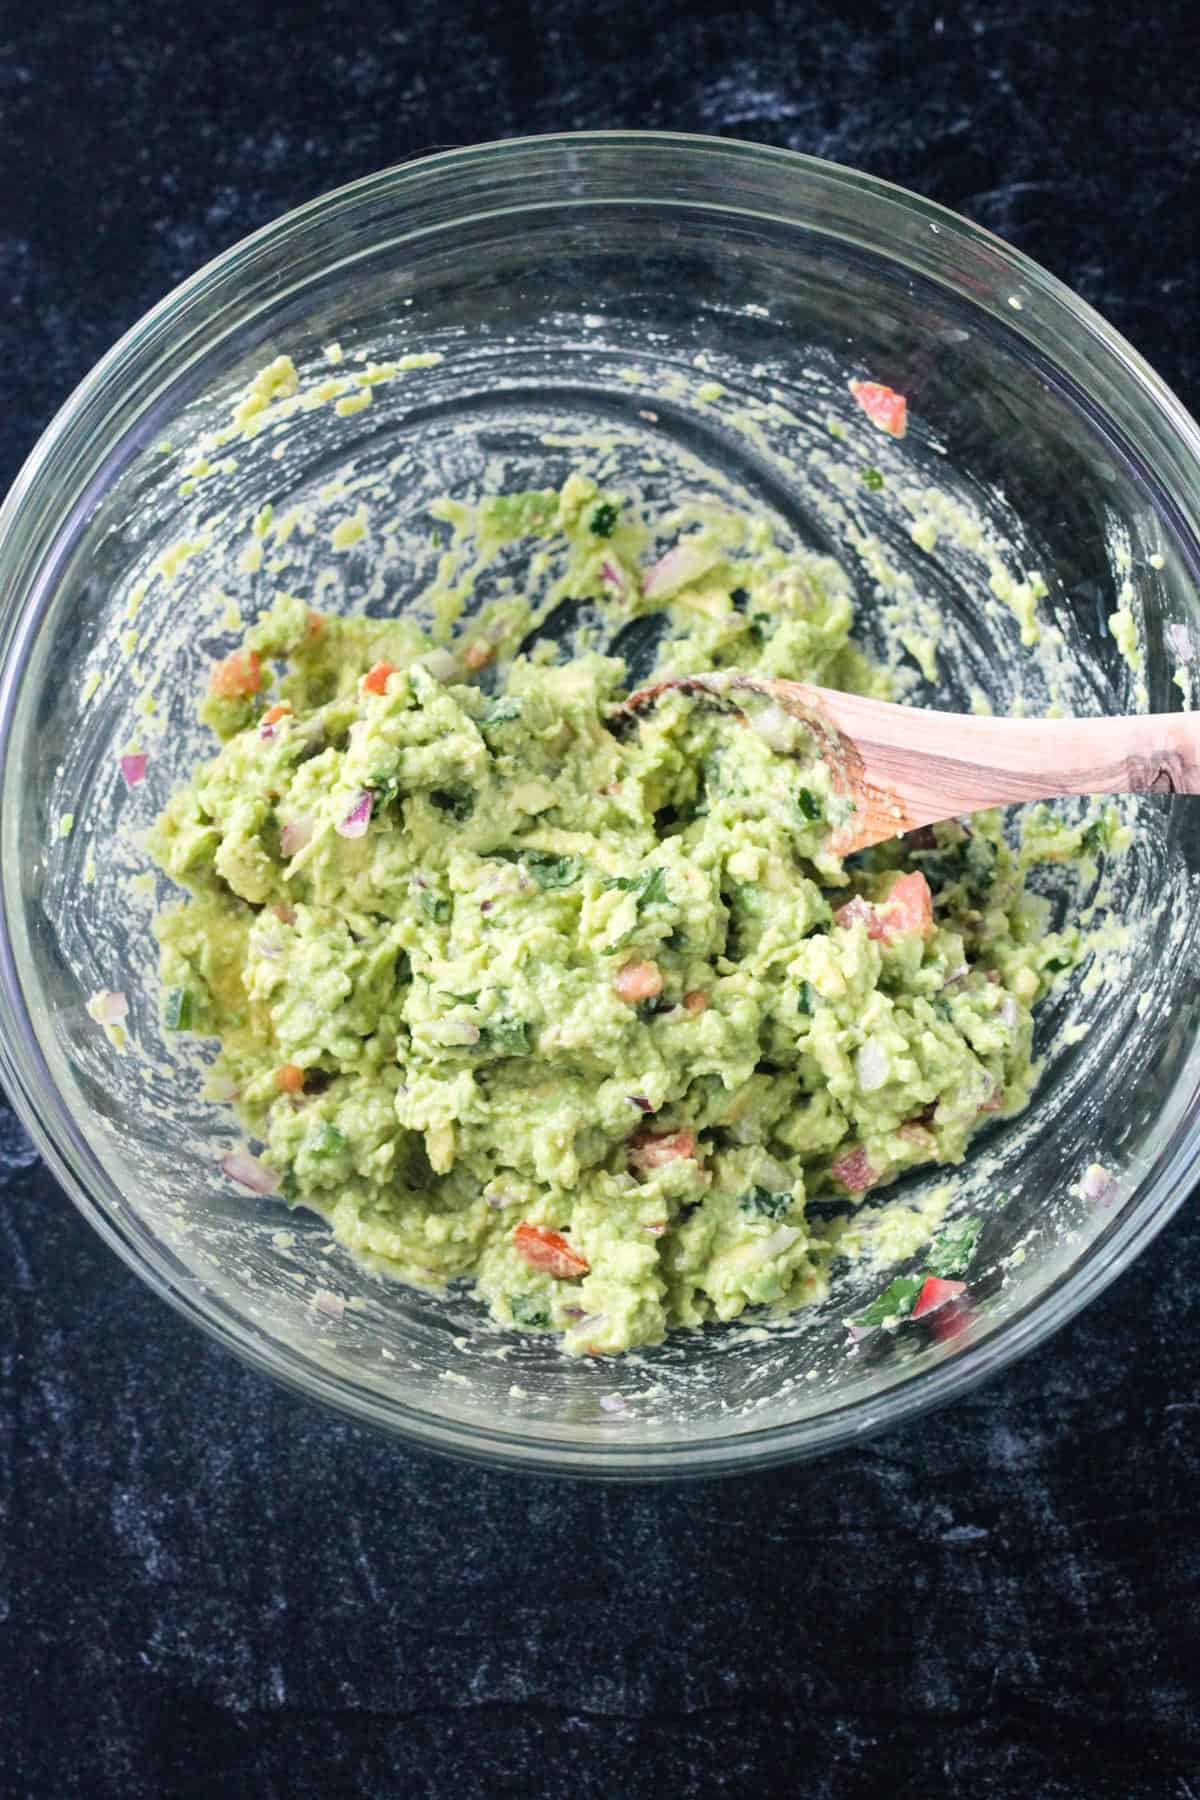 Ingredients mixed into guacamole in a glass bowl.